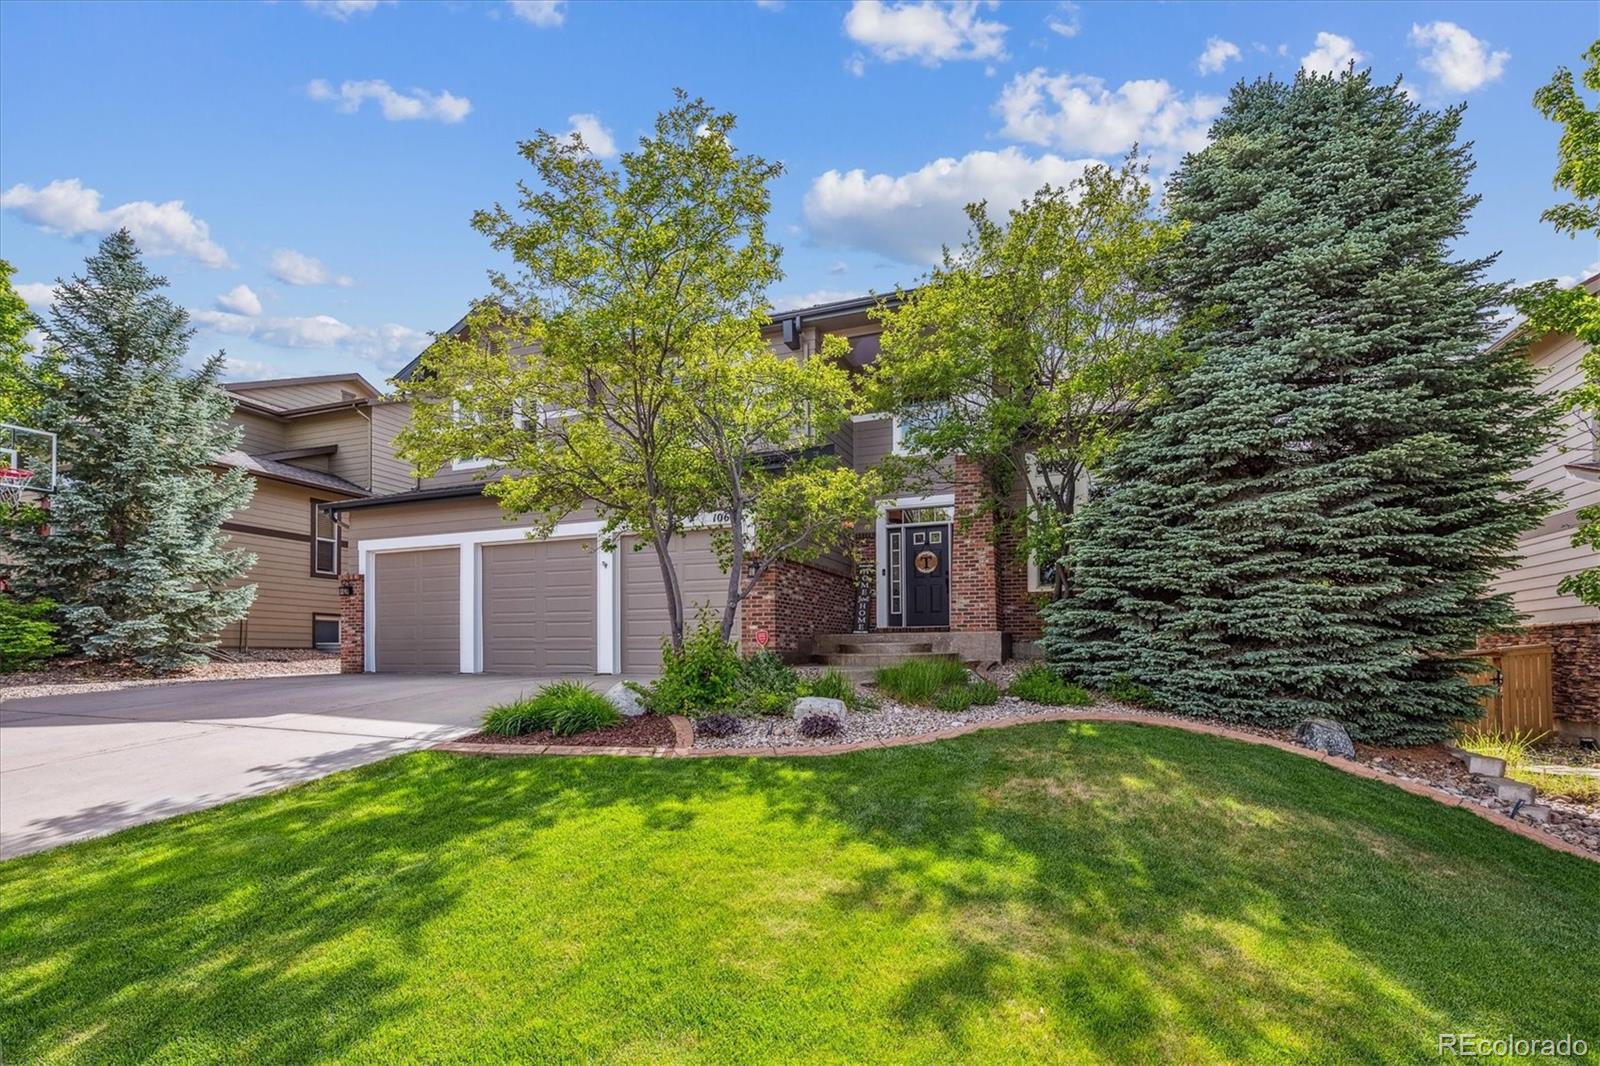 Report Image for 10695  Addison Court,Highlands Ranch, Colorado